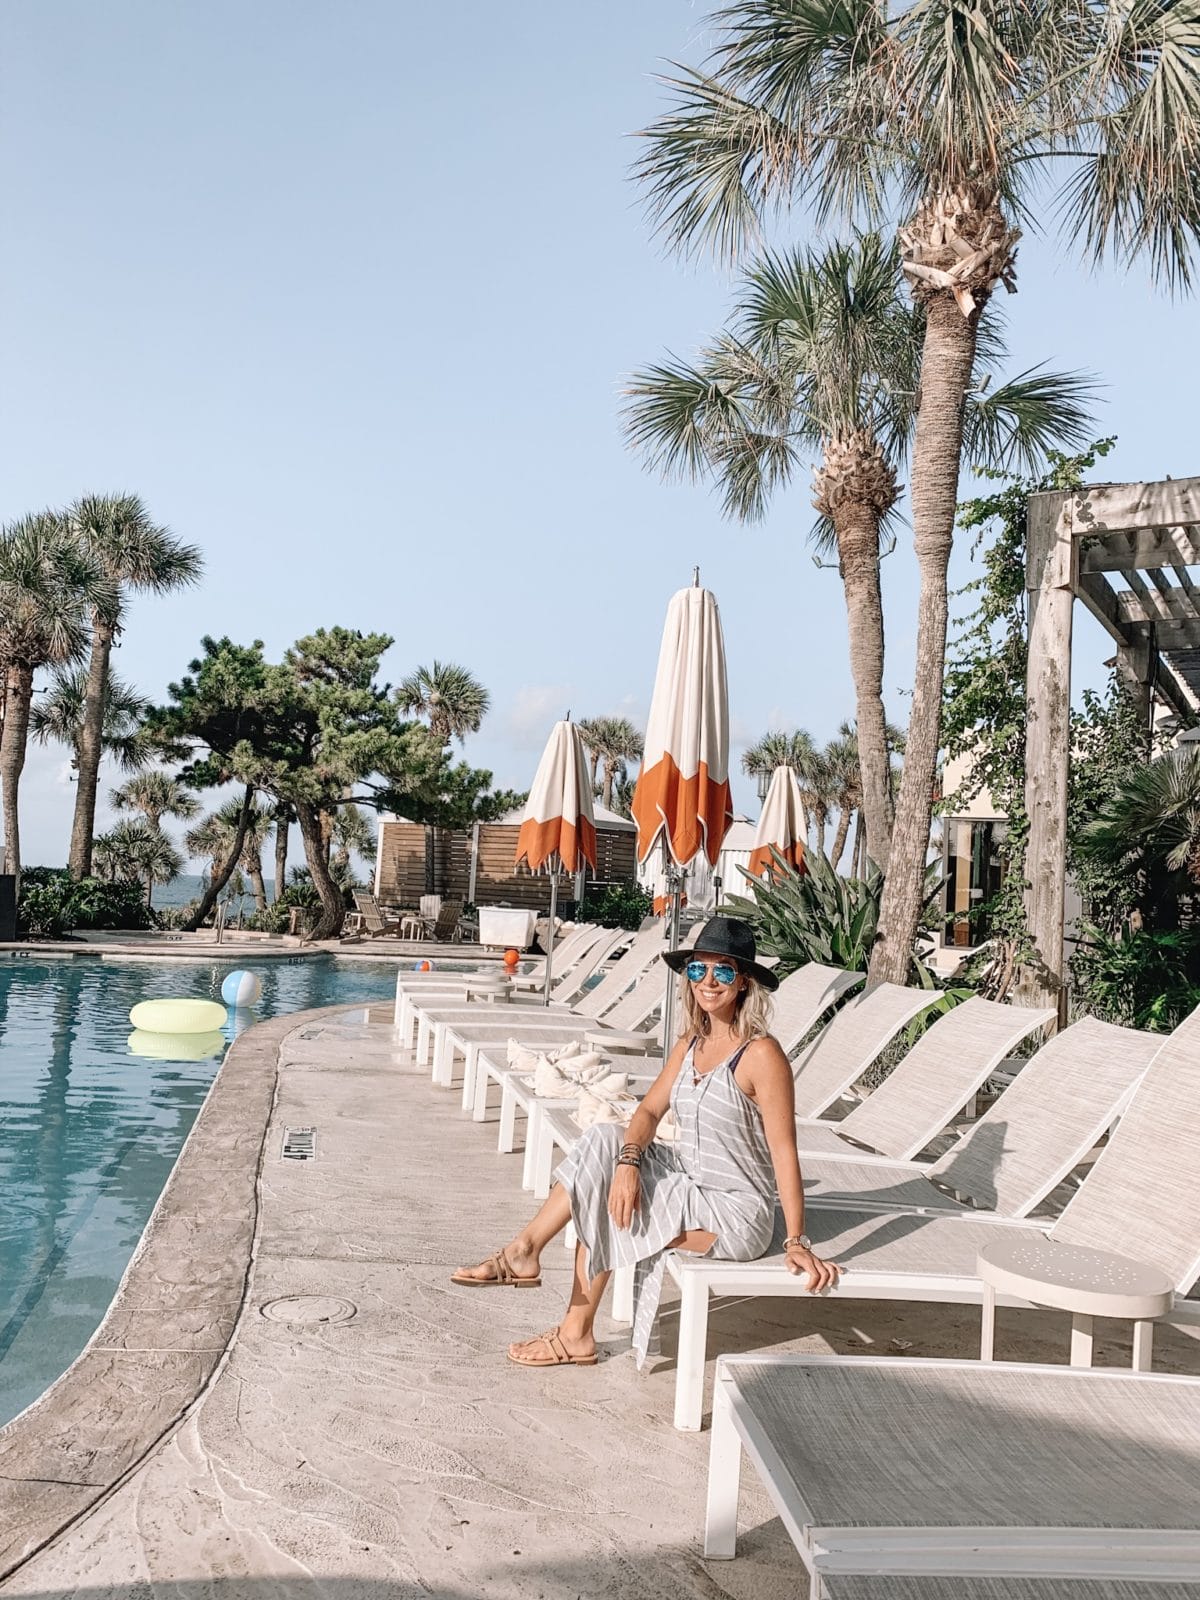 48 Hours in Galveston - grey maxi dress by the pool